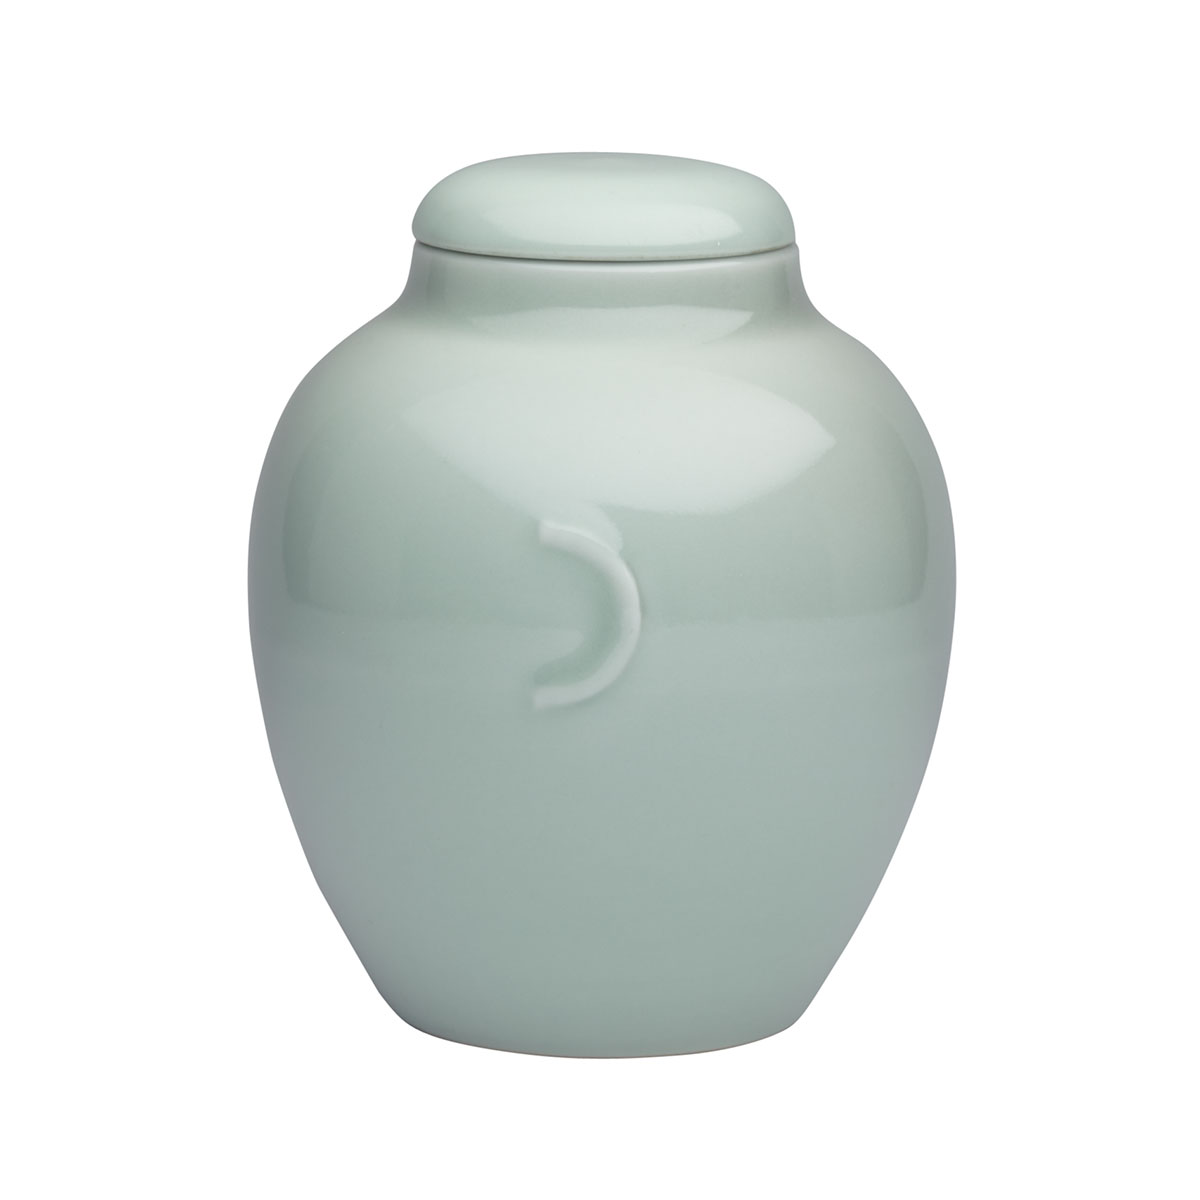 Celadon Glazed Jar and Cover, Qianlong Mark and Possibly of the Period (1736-1795)